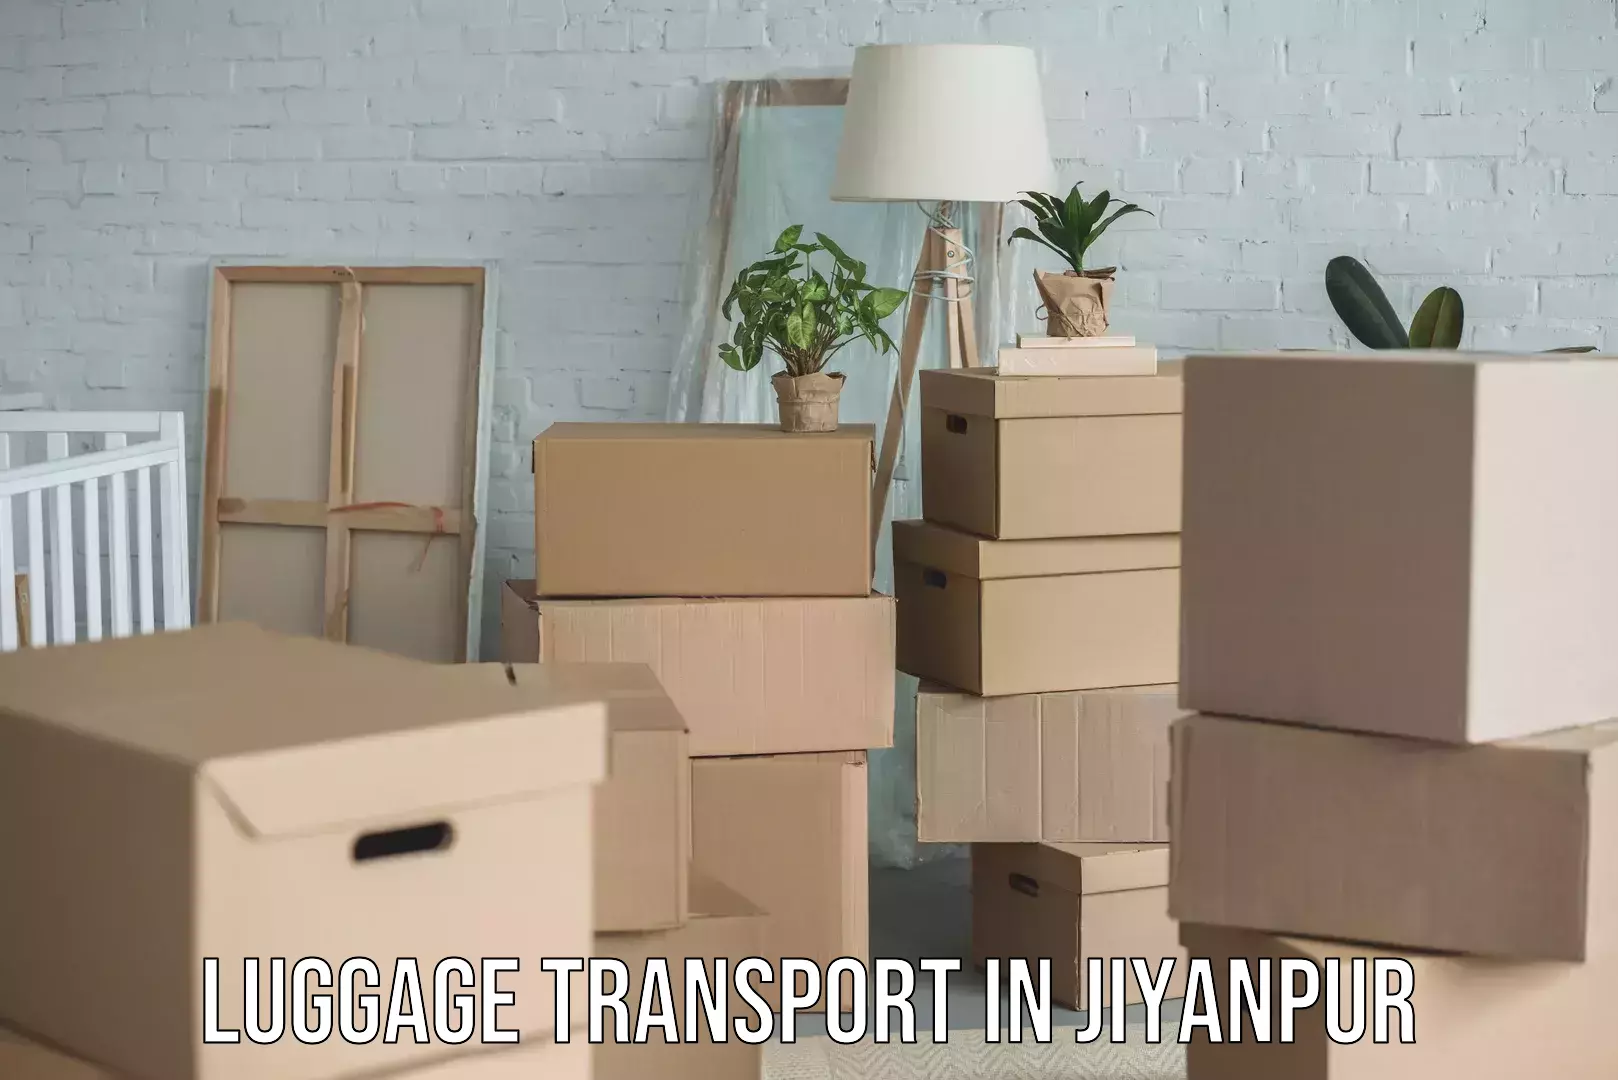 Discounted baggage transport in Jiyanpur